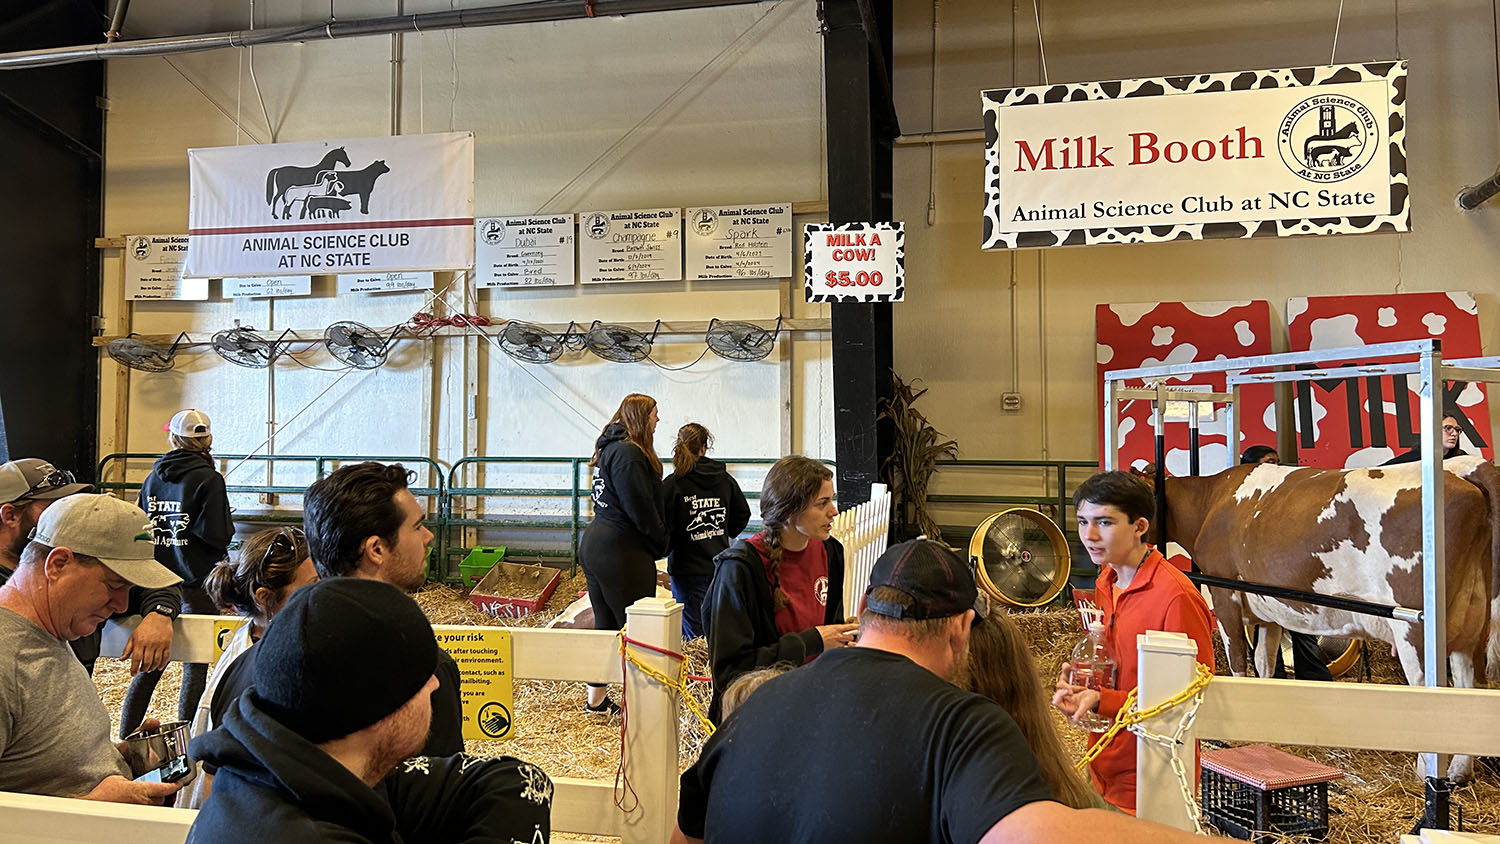 animal science club milk booth at the state fair